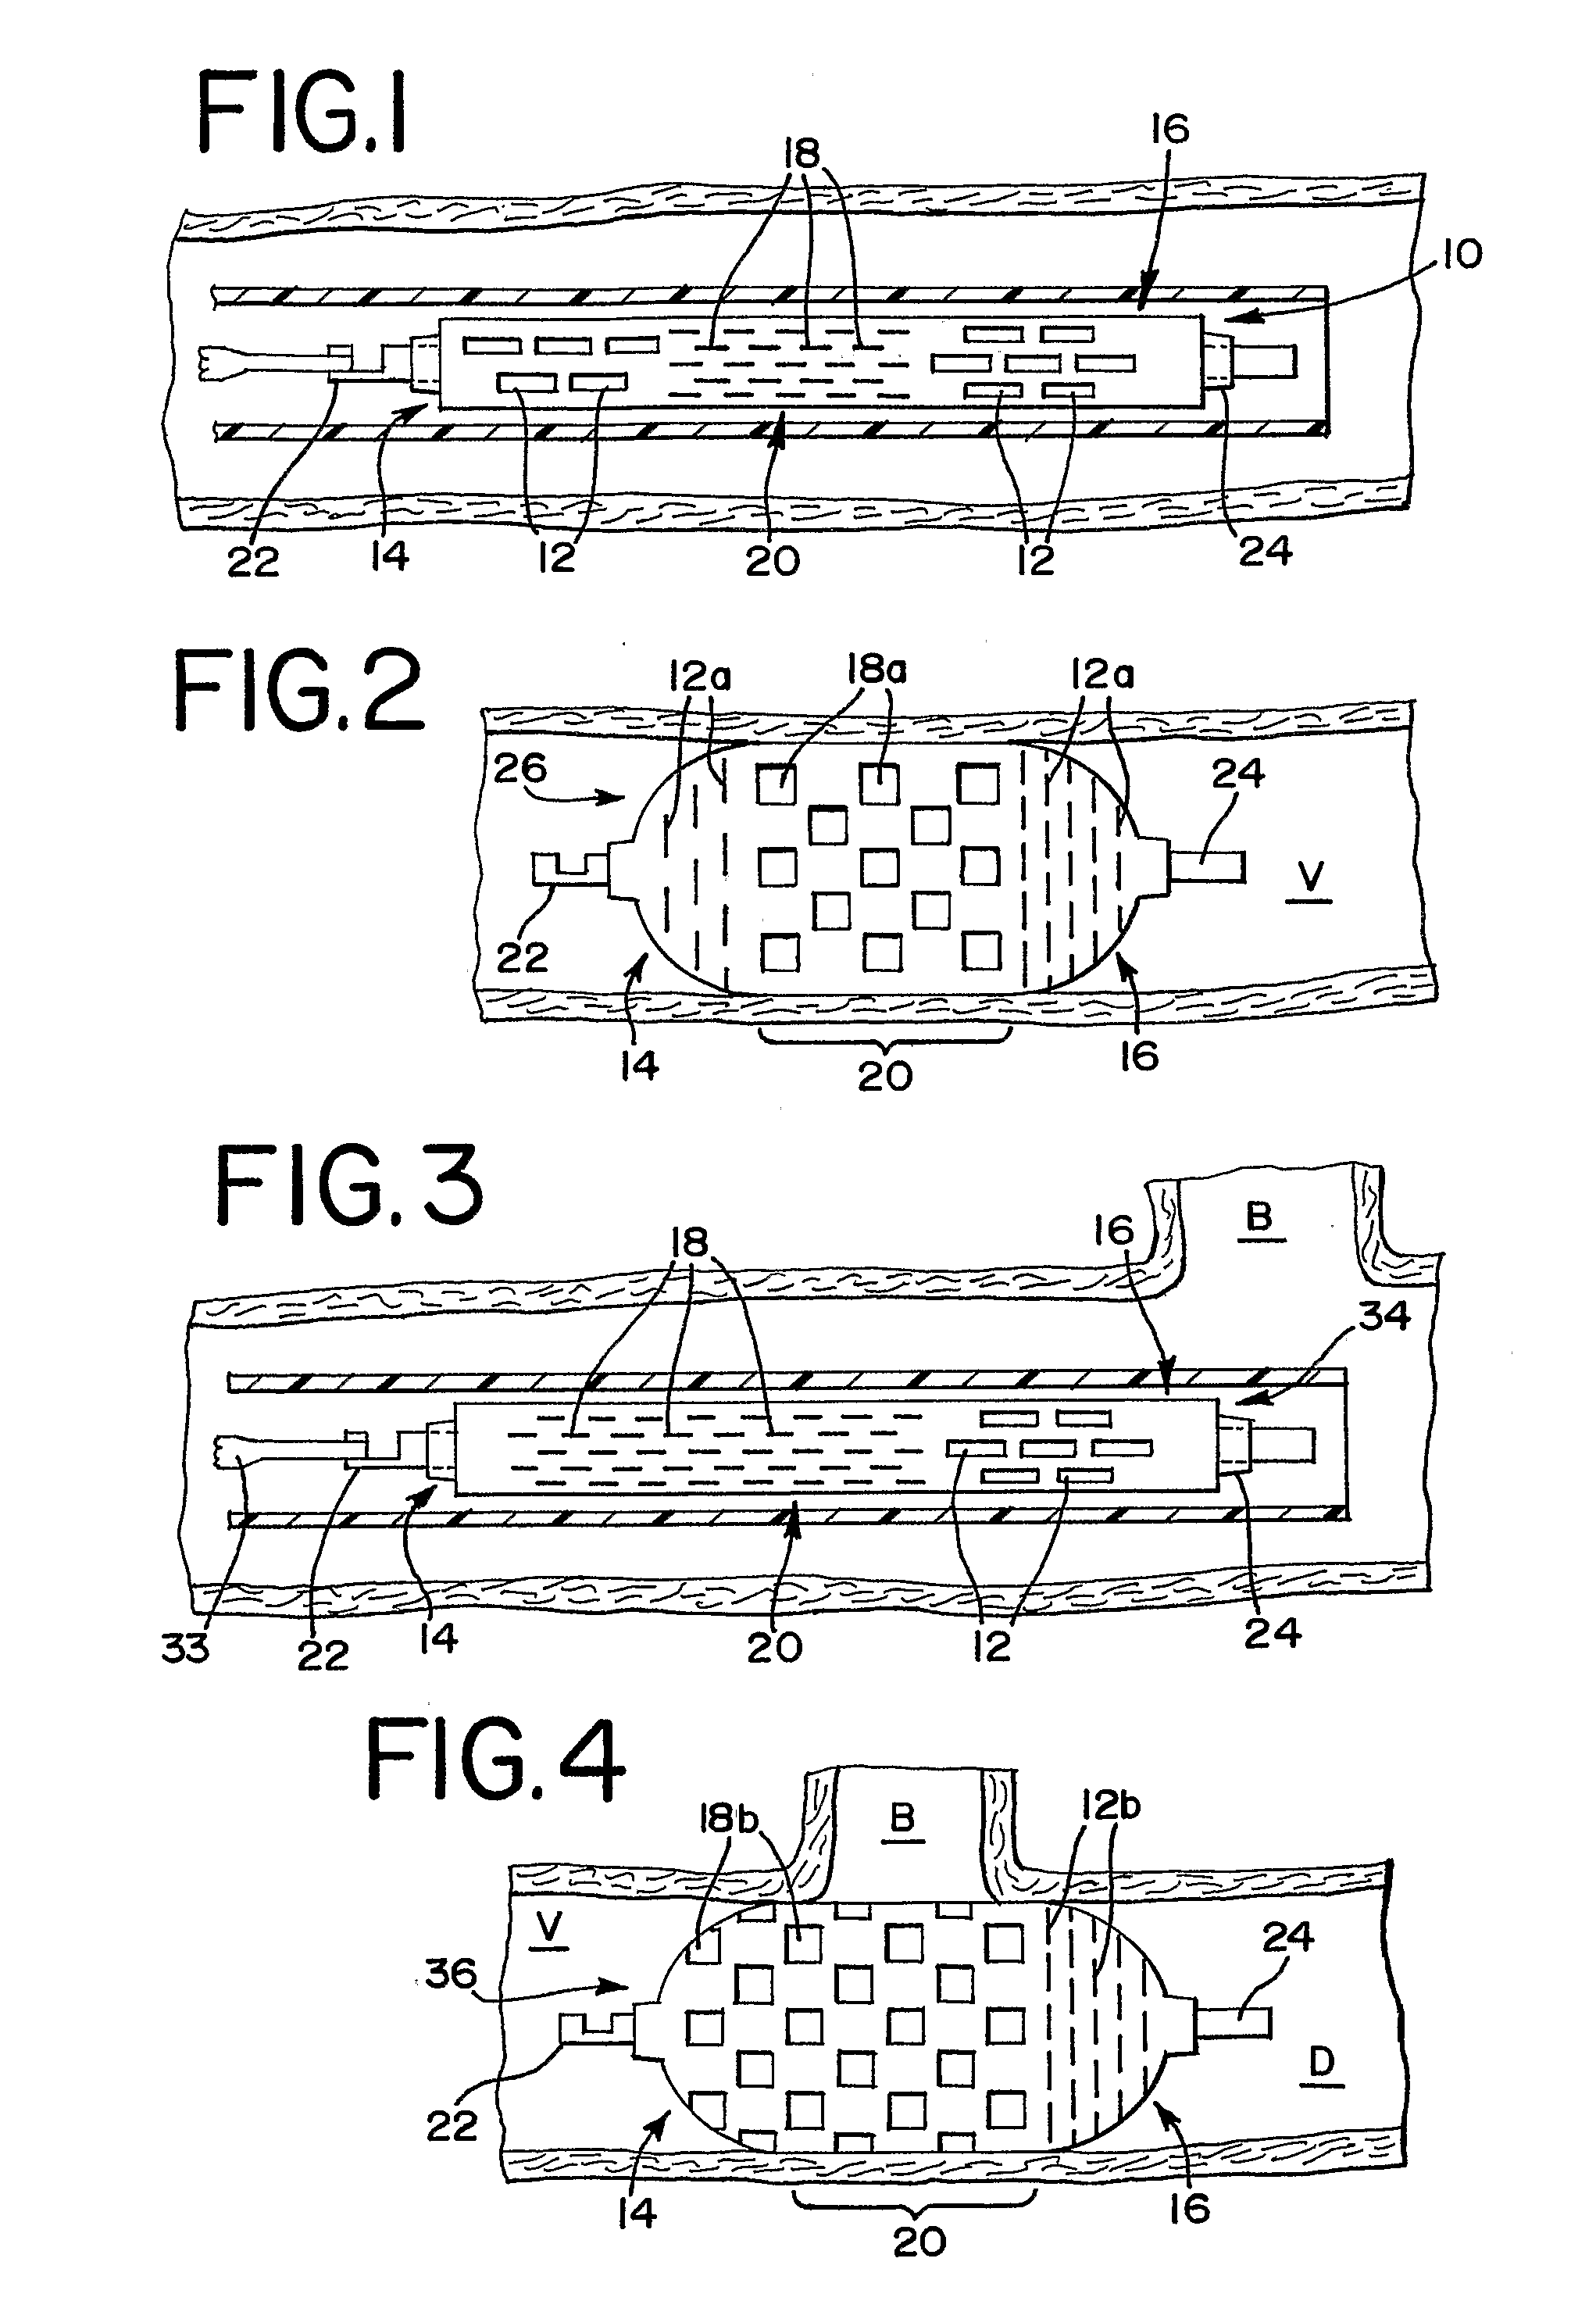 Thin Film Devices for Temporary or Permanent Occlusion of a Vessel